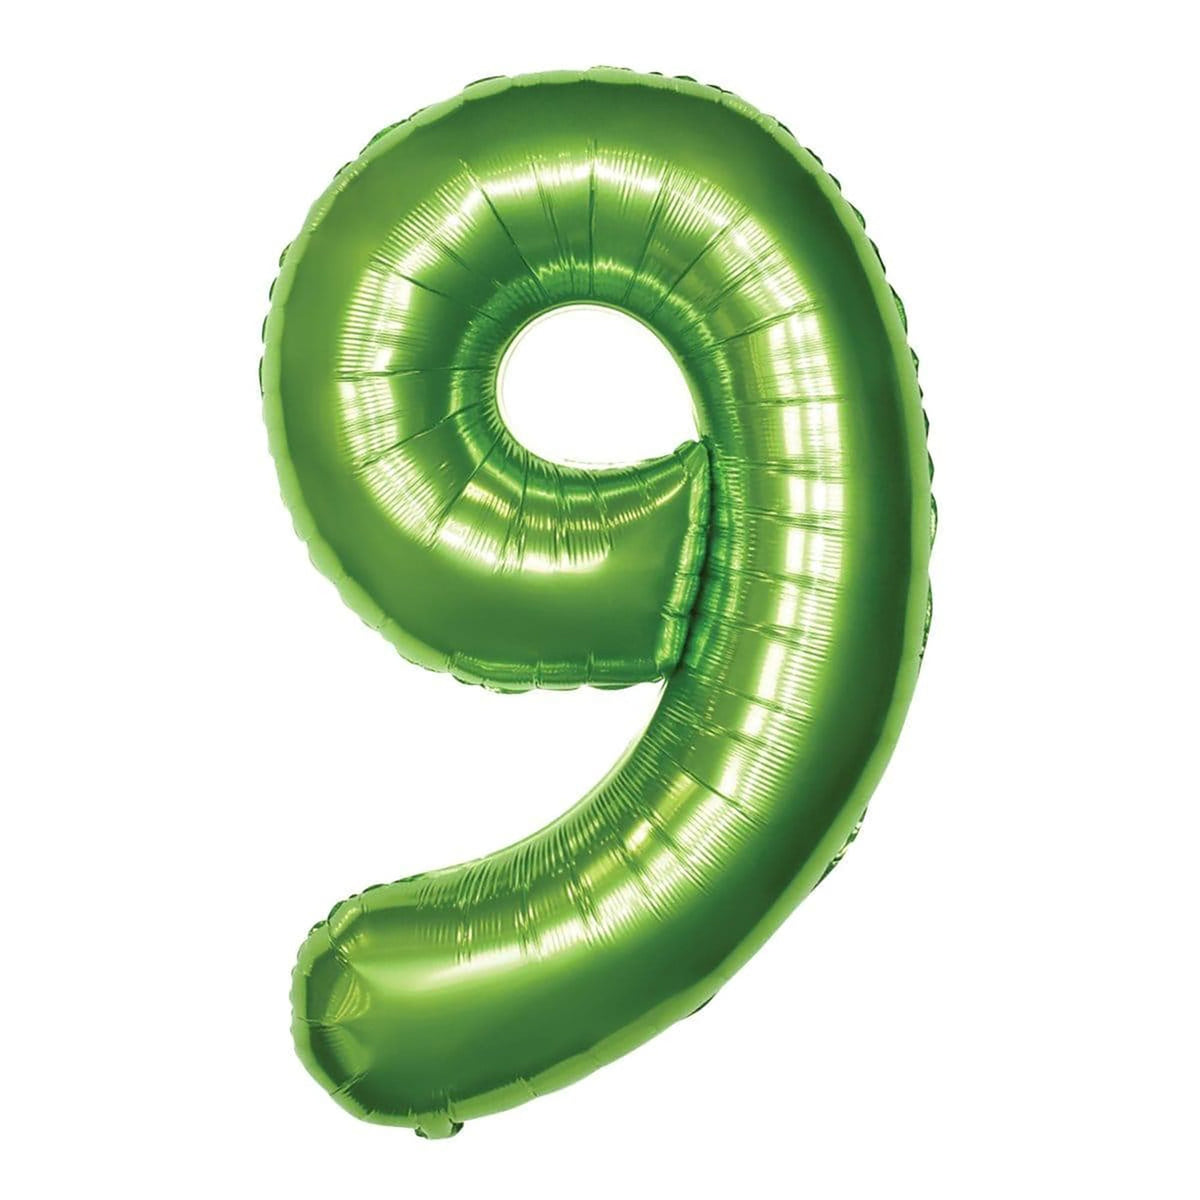 BOOMBA INTERNATIONAL TRADING CO,. LTD Balloons Lime Green Number 9 Supershape Foil Balloon, 40 Inches, 1 Count 810077659830